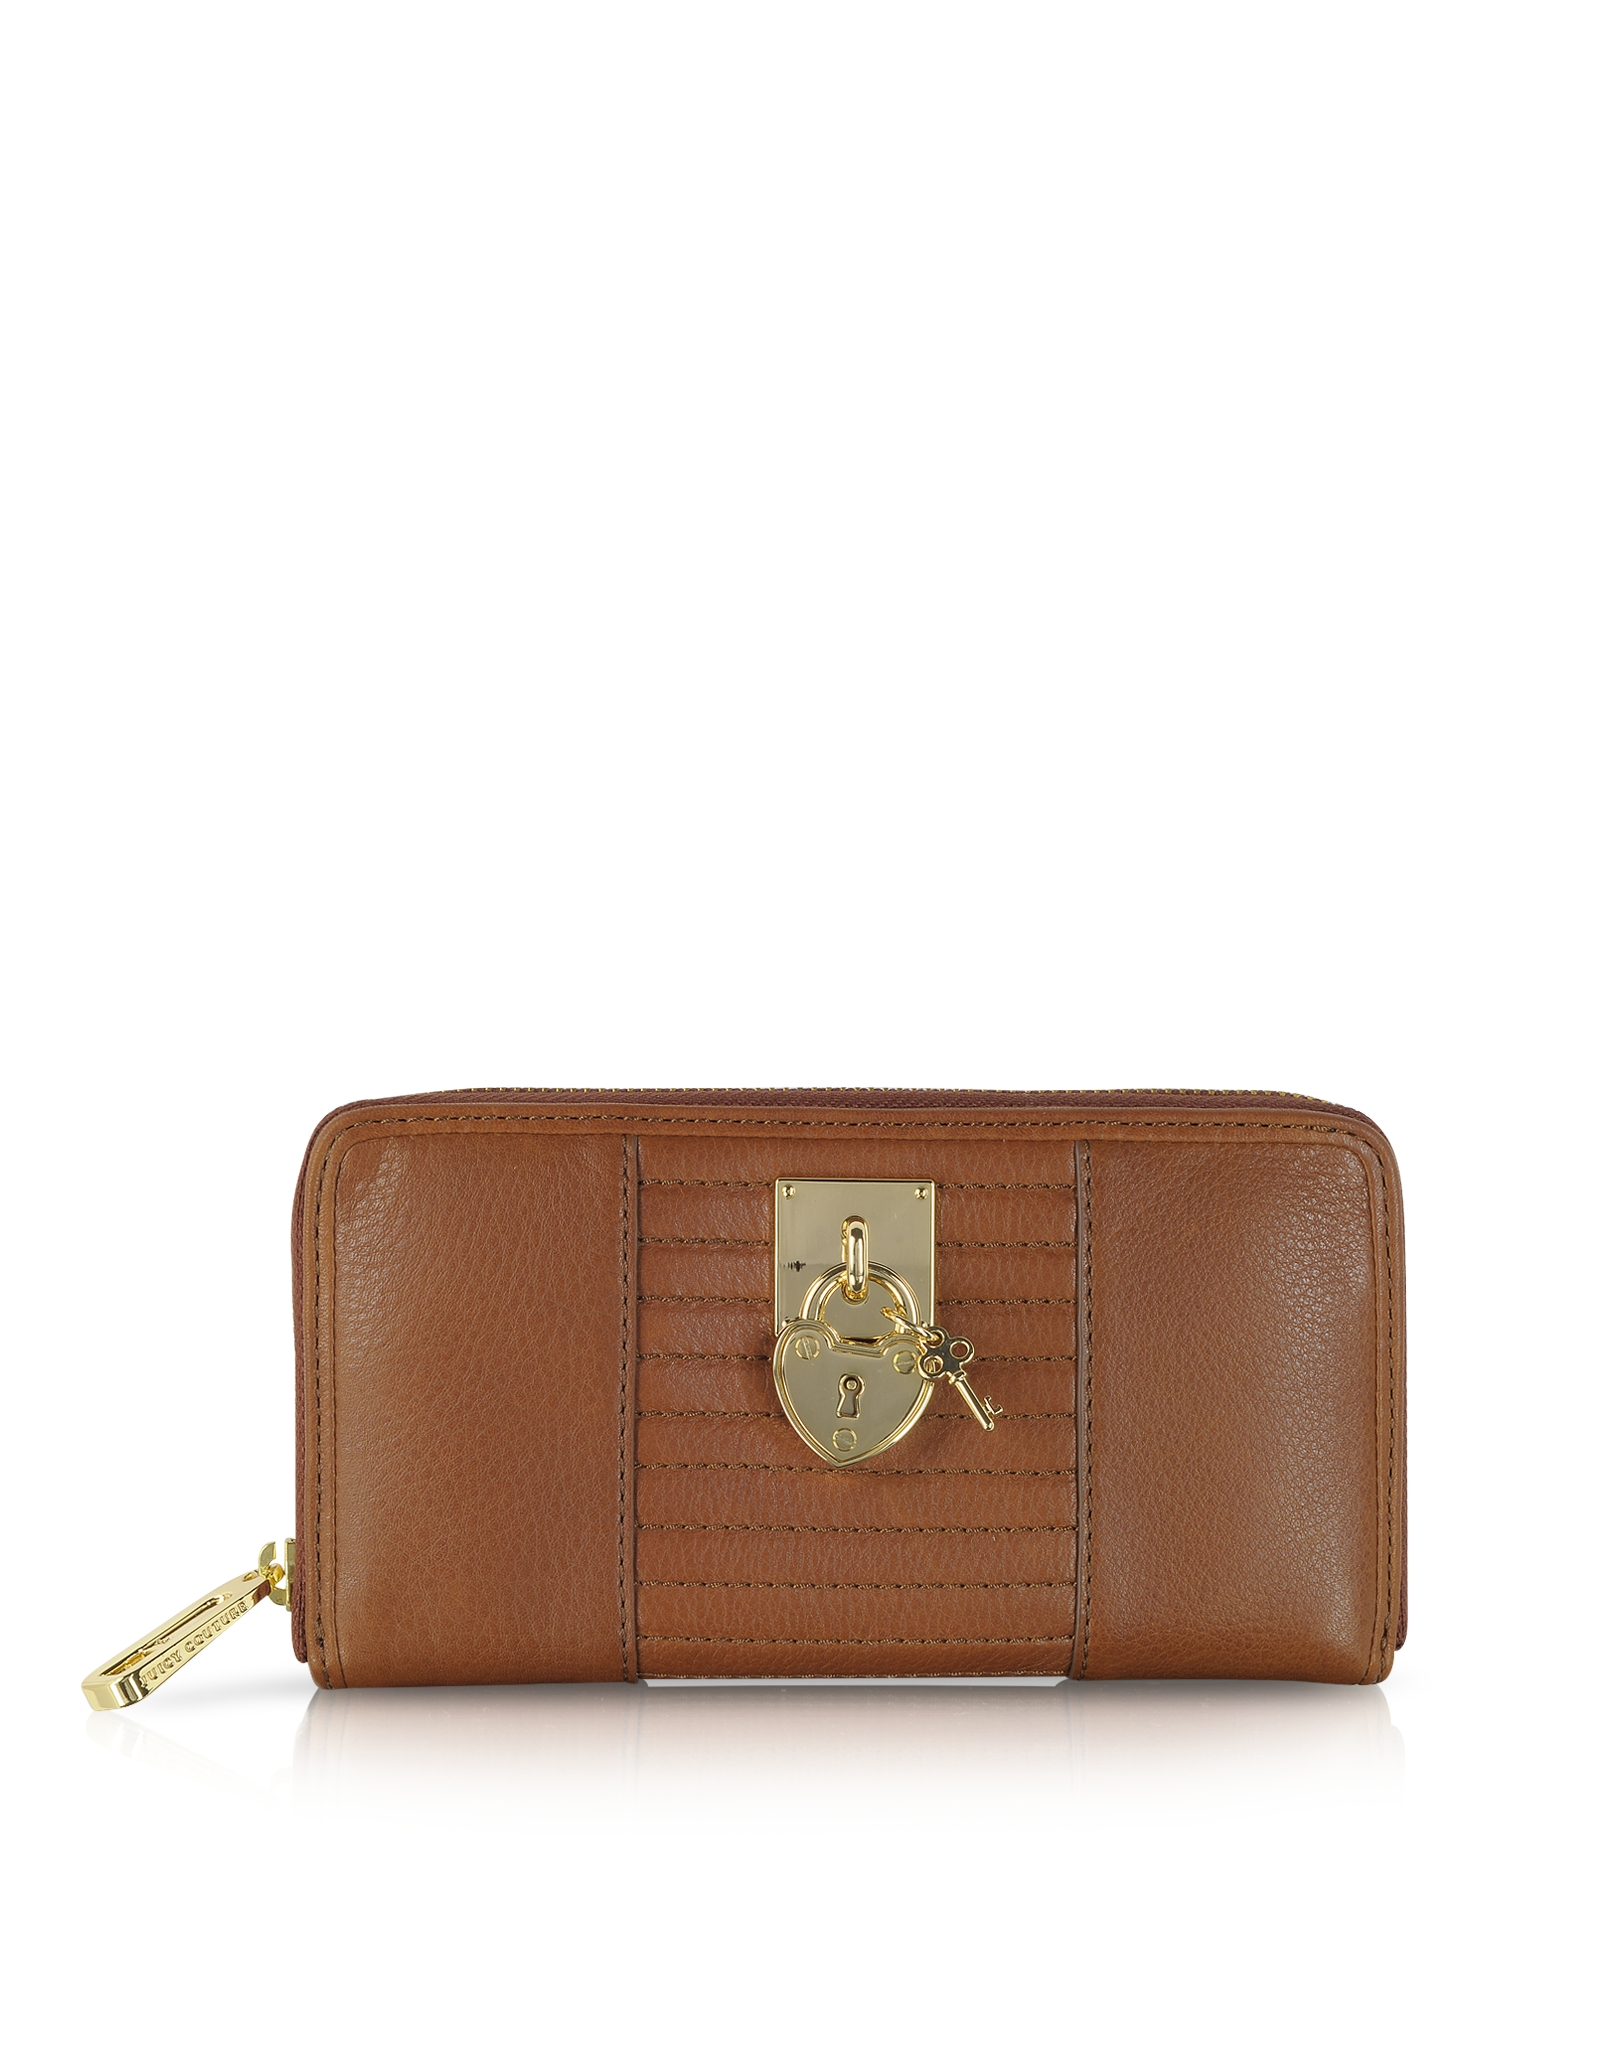 Juicy couture Genuine Leather Zip Continental Wallet in Brown | Lyst